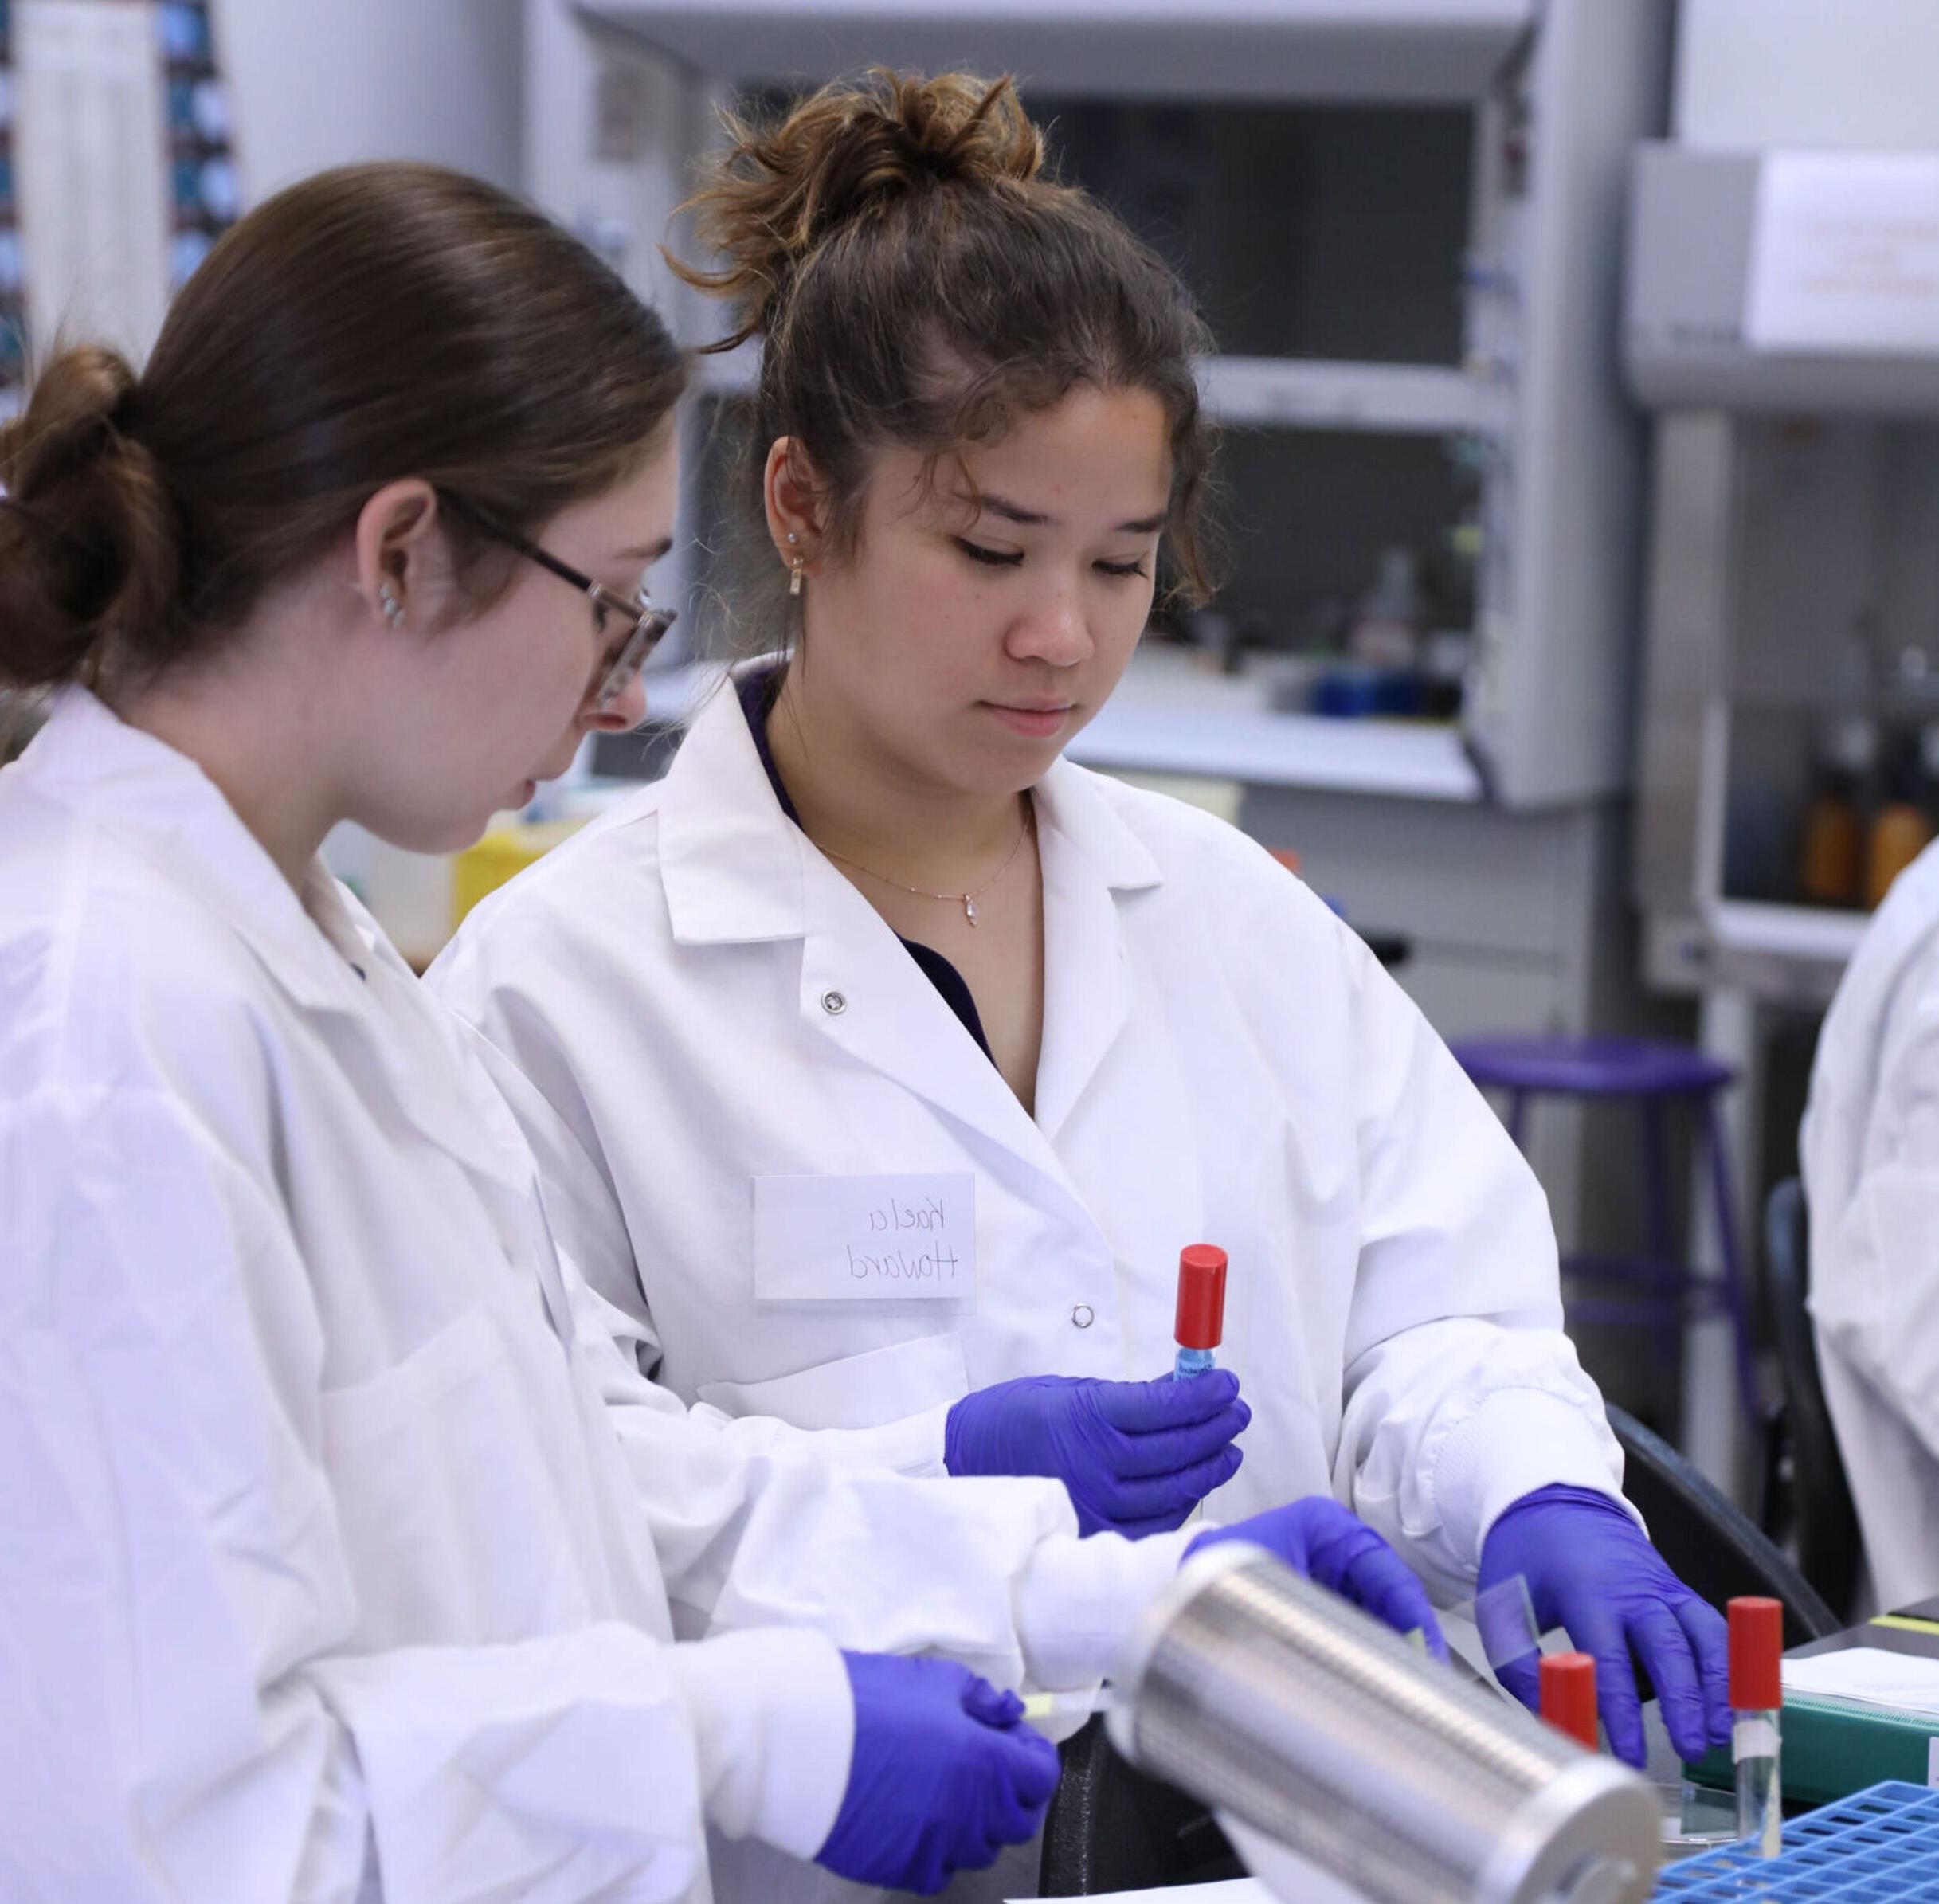 Two female students in lab coats work with vials in a laboratory